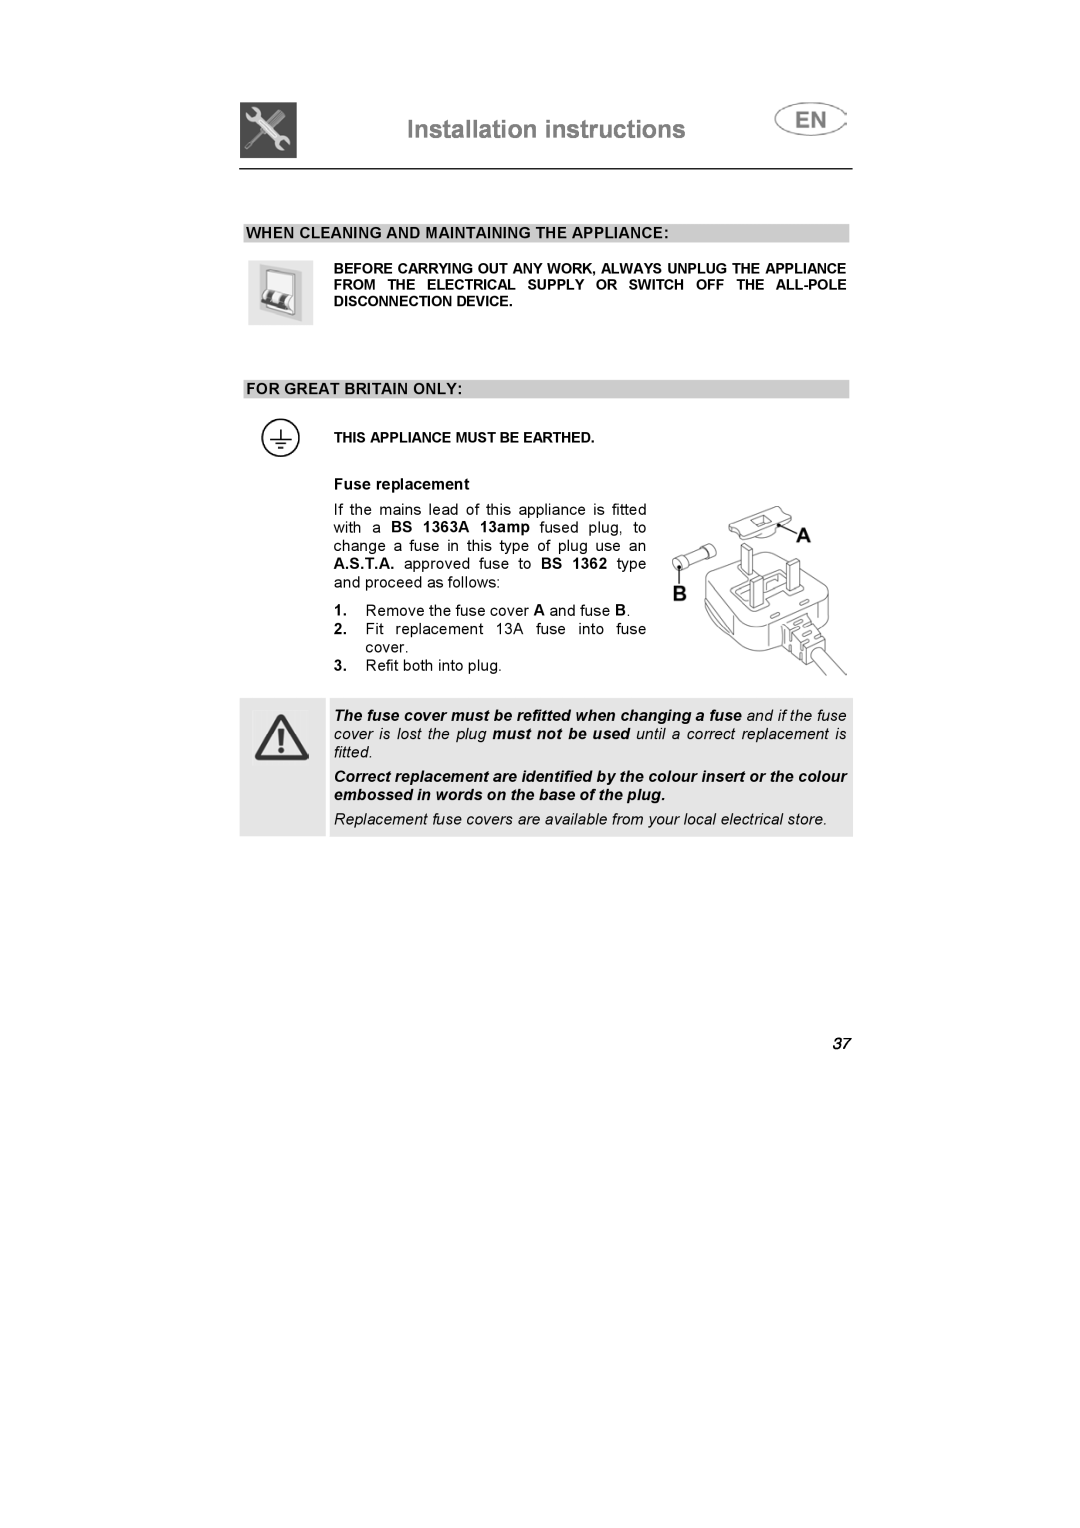 Smeg KLVS51NE, KLVS52X Installation instructions, When Cleaning And Maintaining The Appliance, For Great Britain Only 